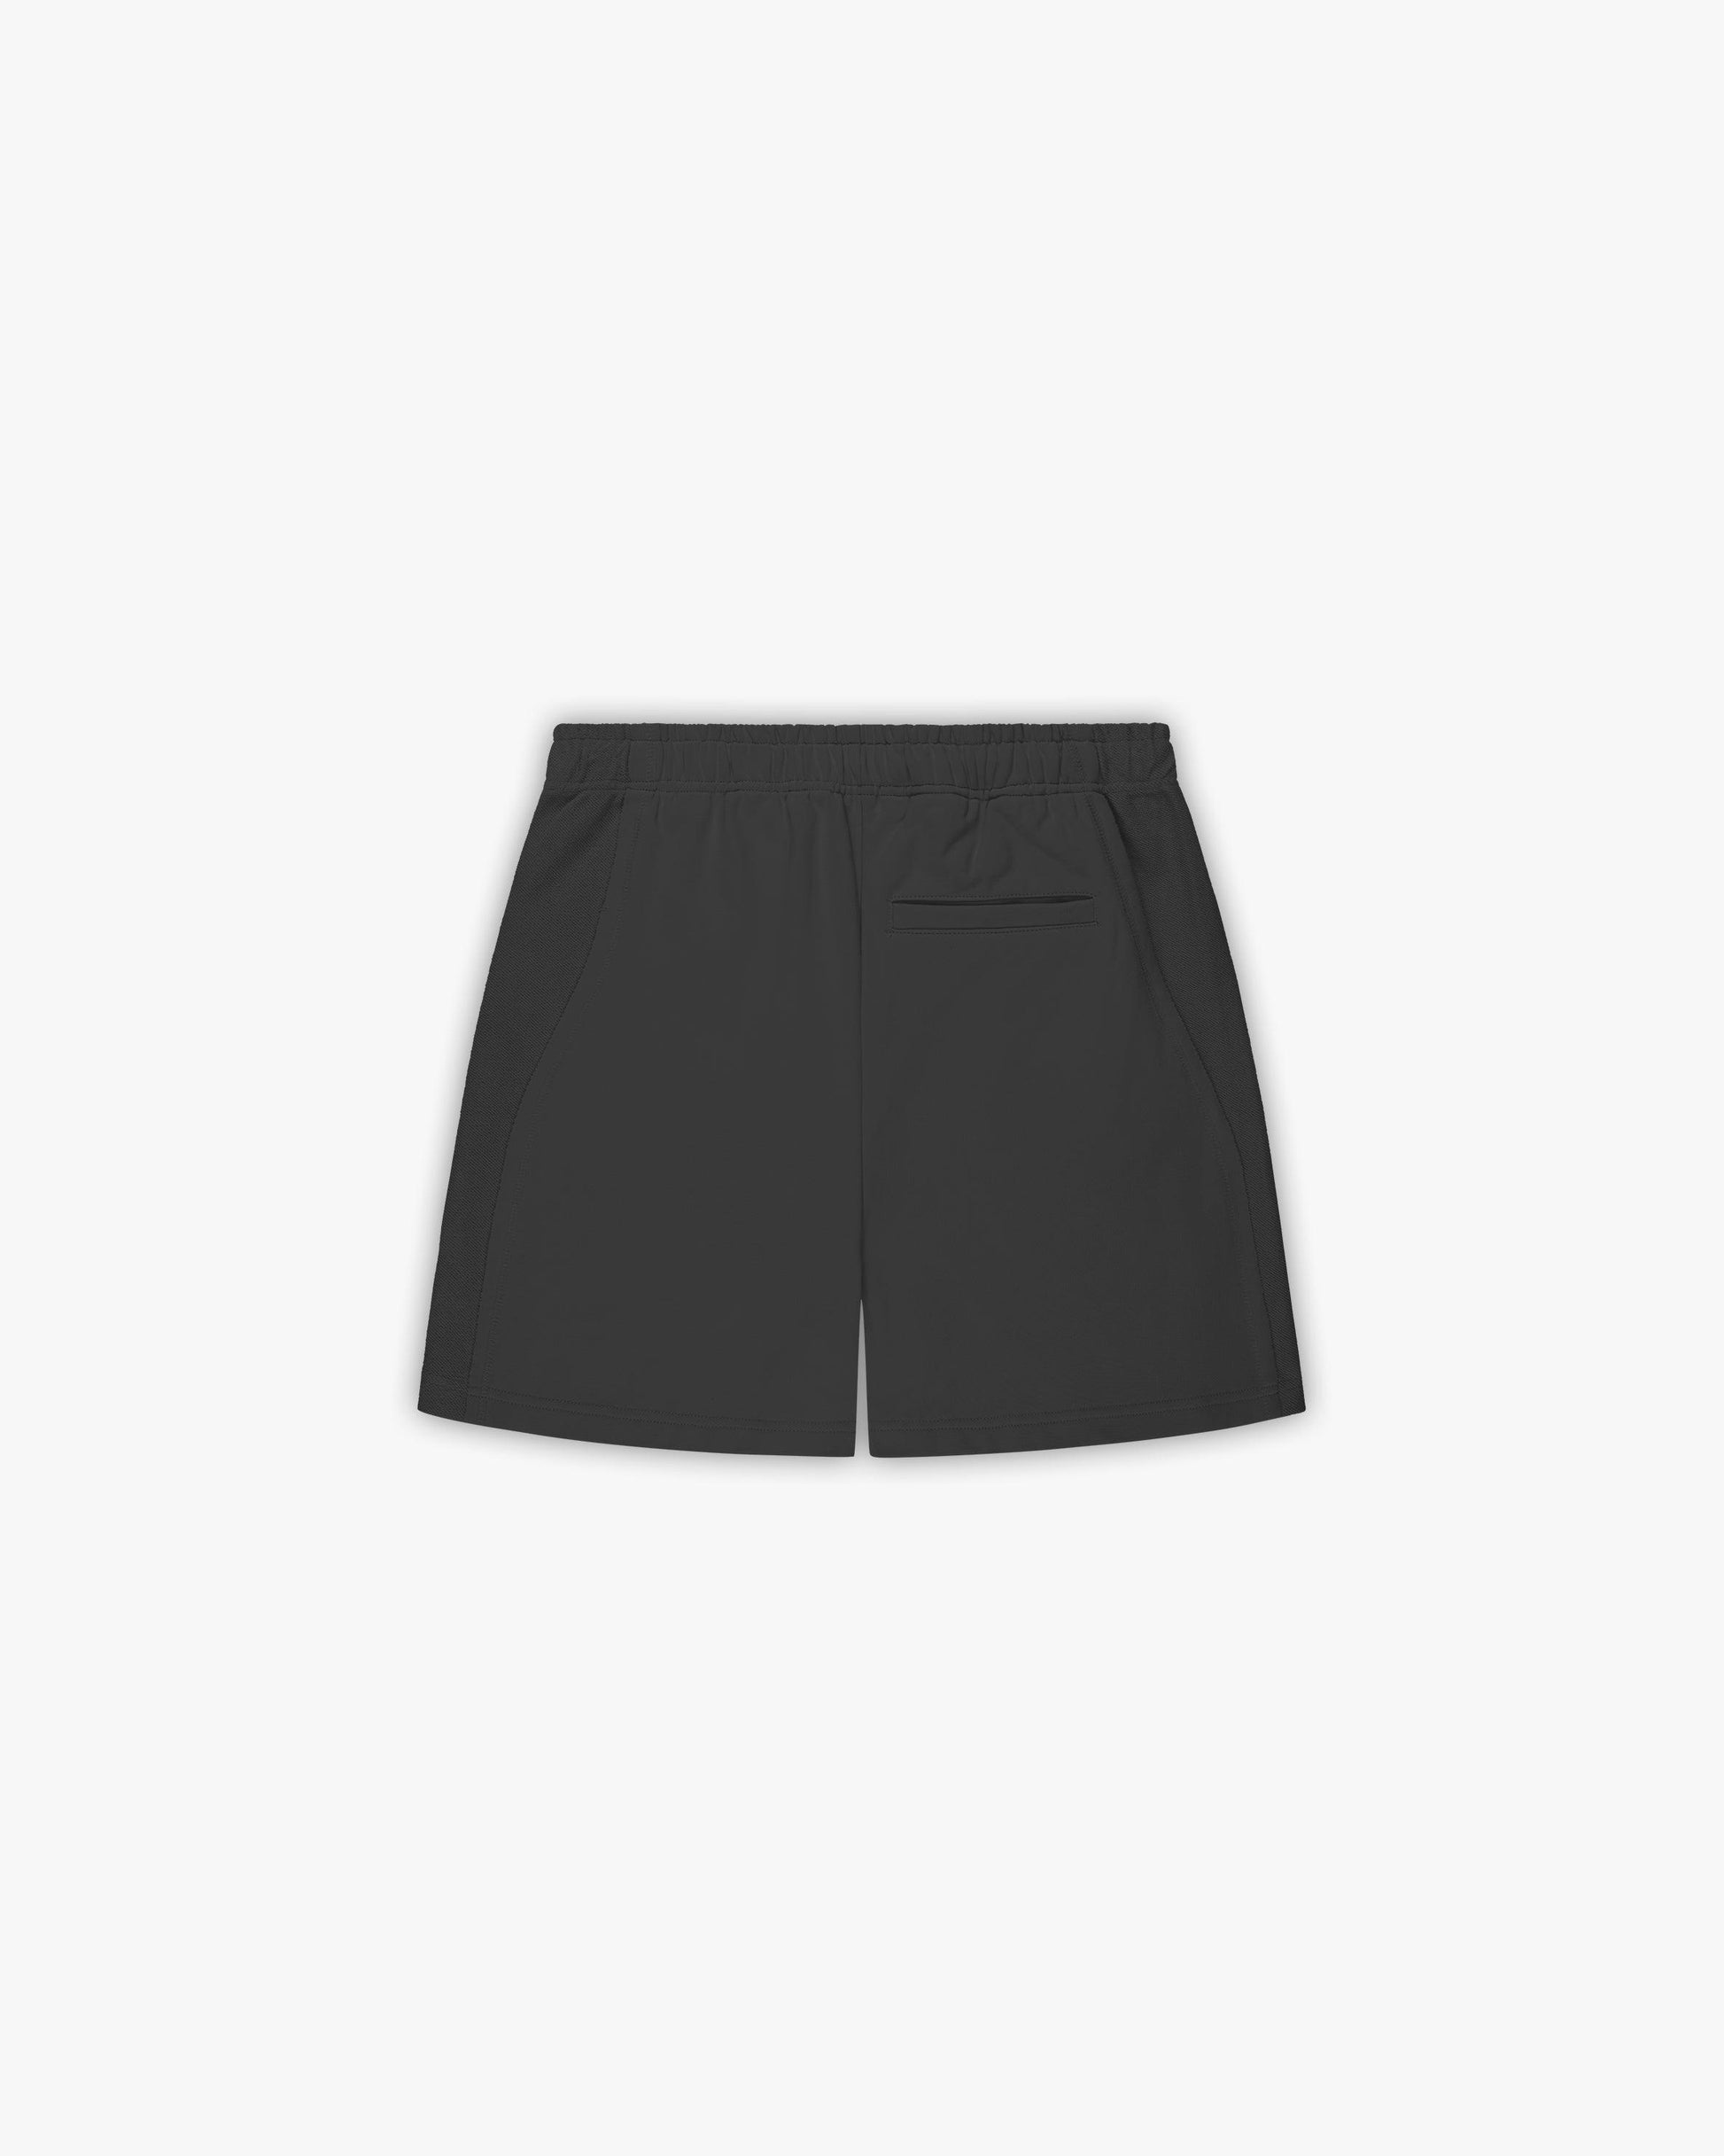 INSIDE OUT SHORTS ASH GREY - VICINITY